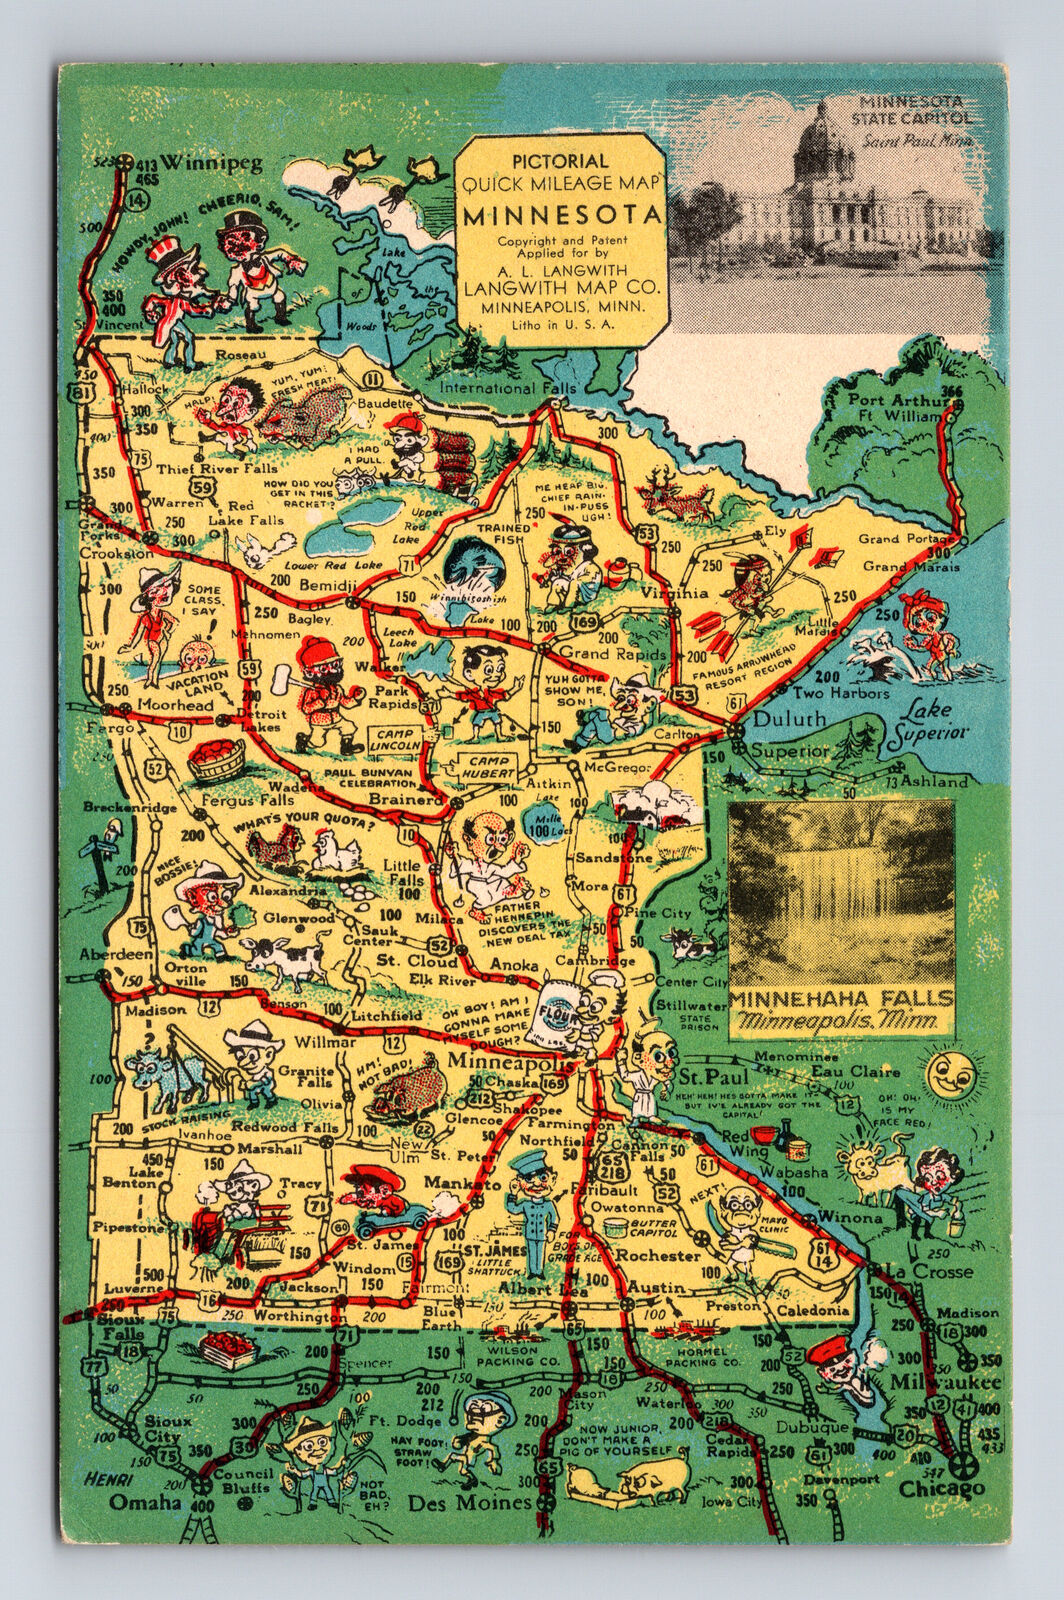 Pictorial Tourist Attraction Map Greetings From State of Minnesota MN Postcard